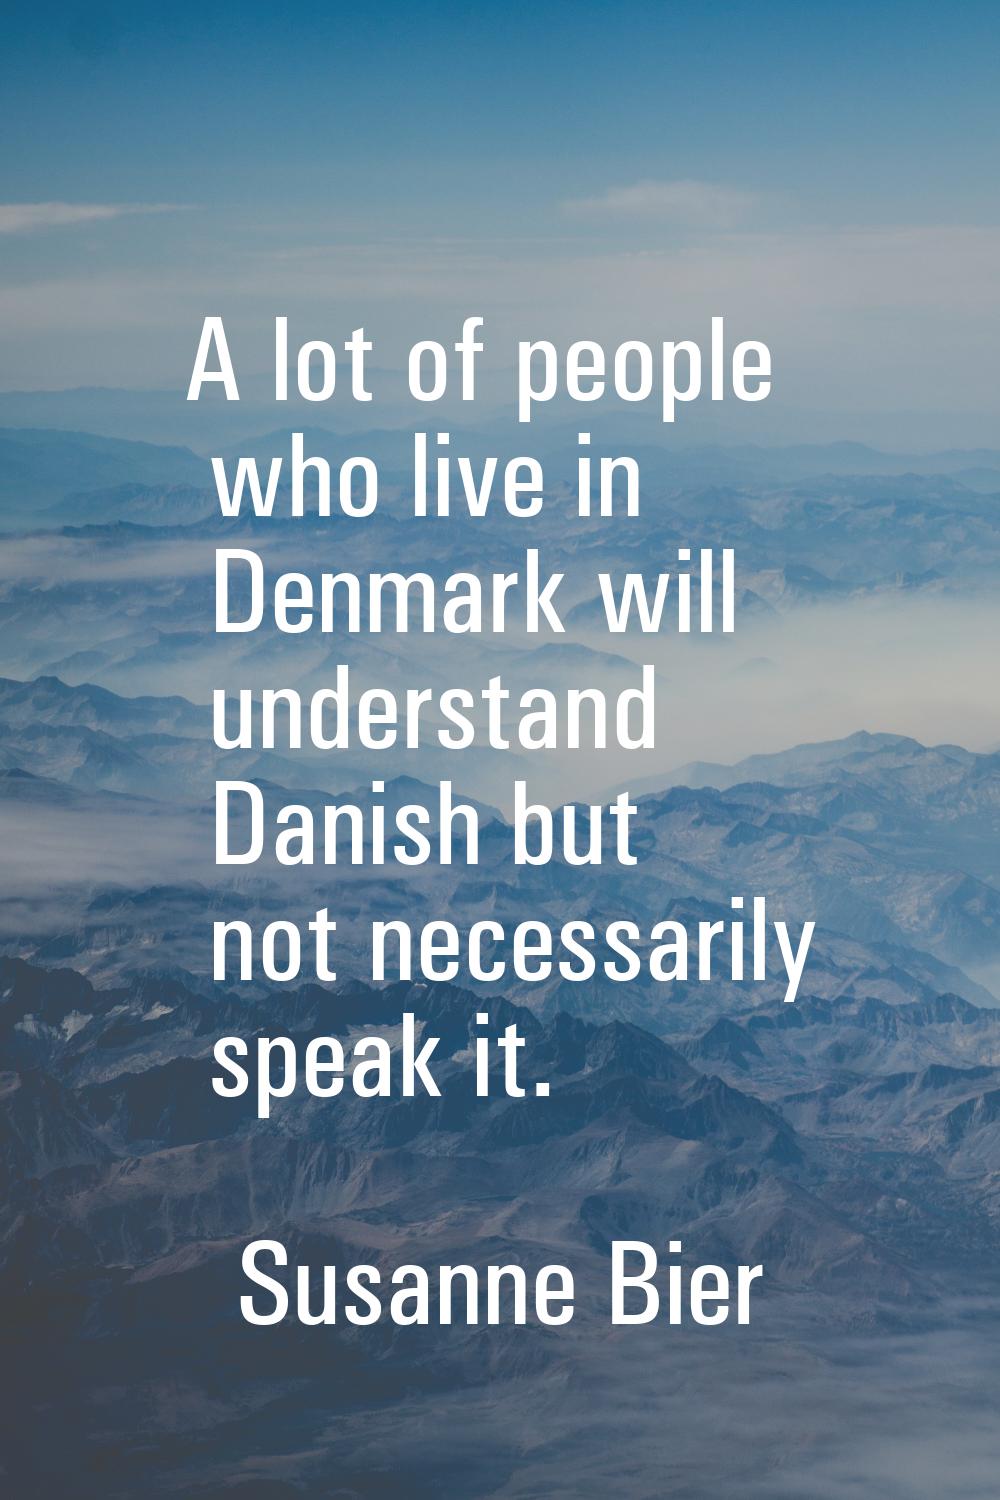 A lot of people who live in Denmark will understand Danish but not necessarily speak it.